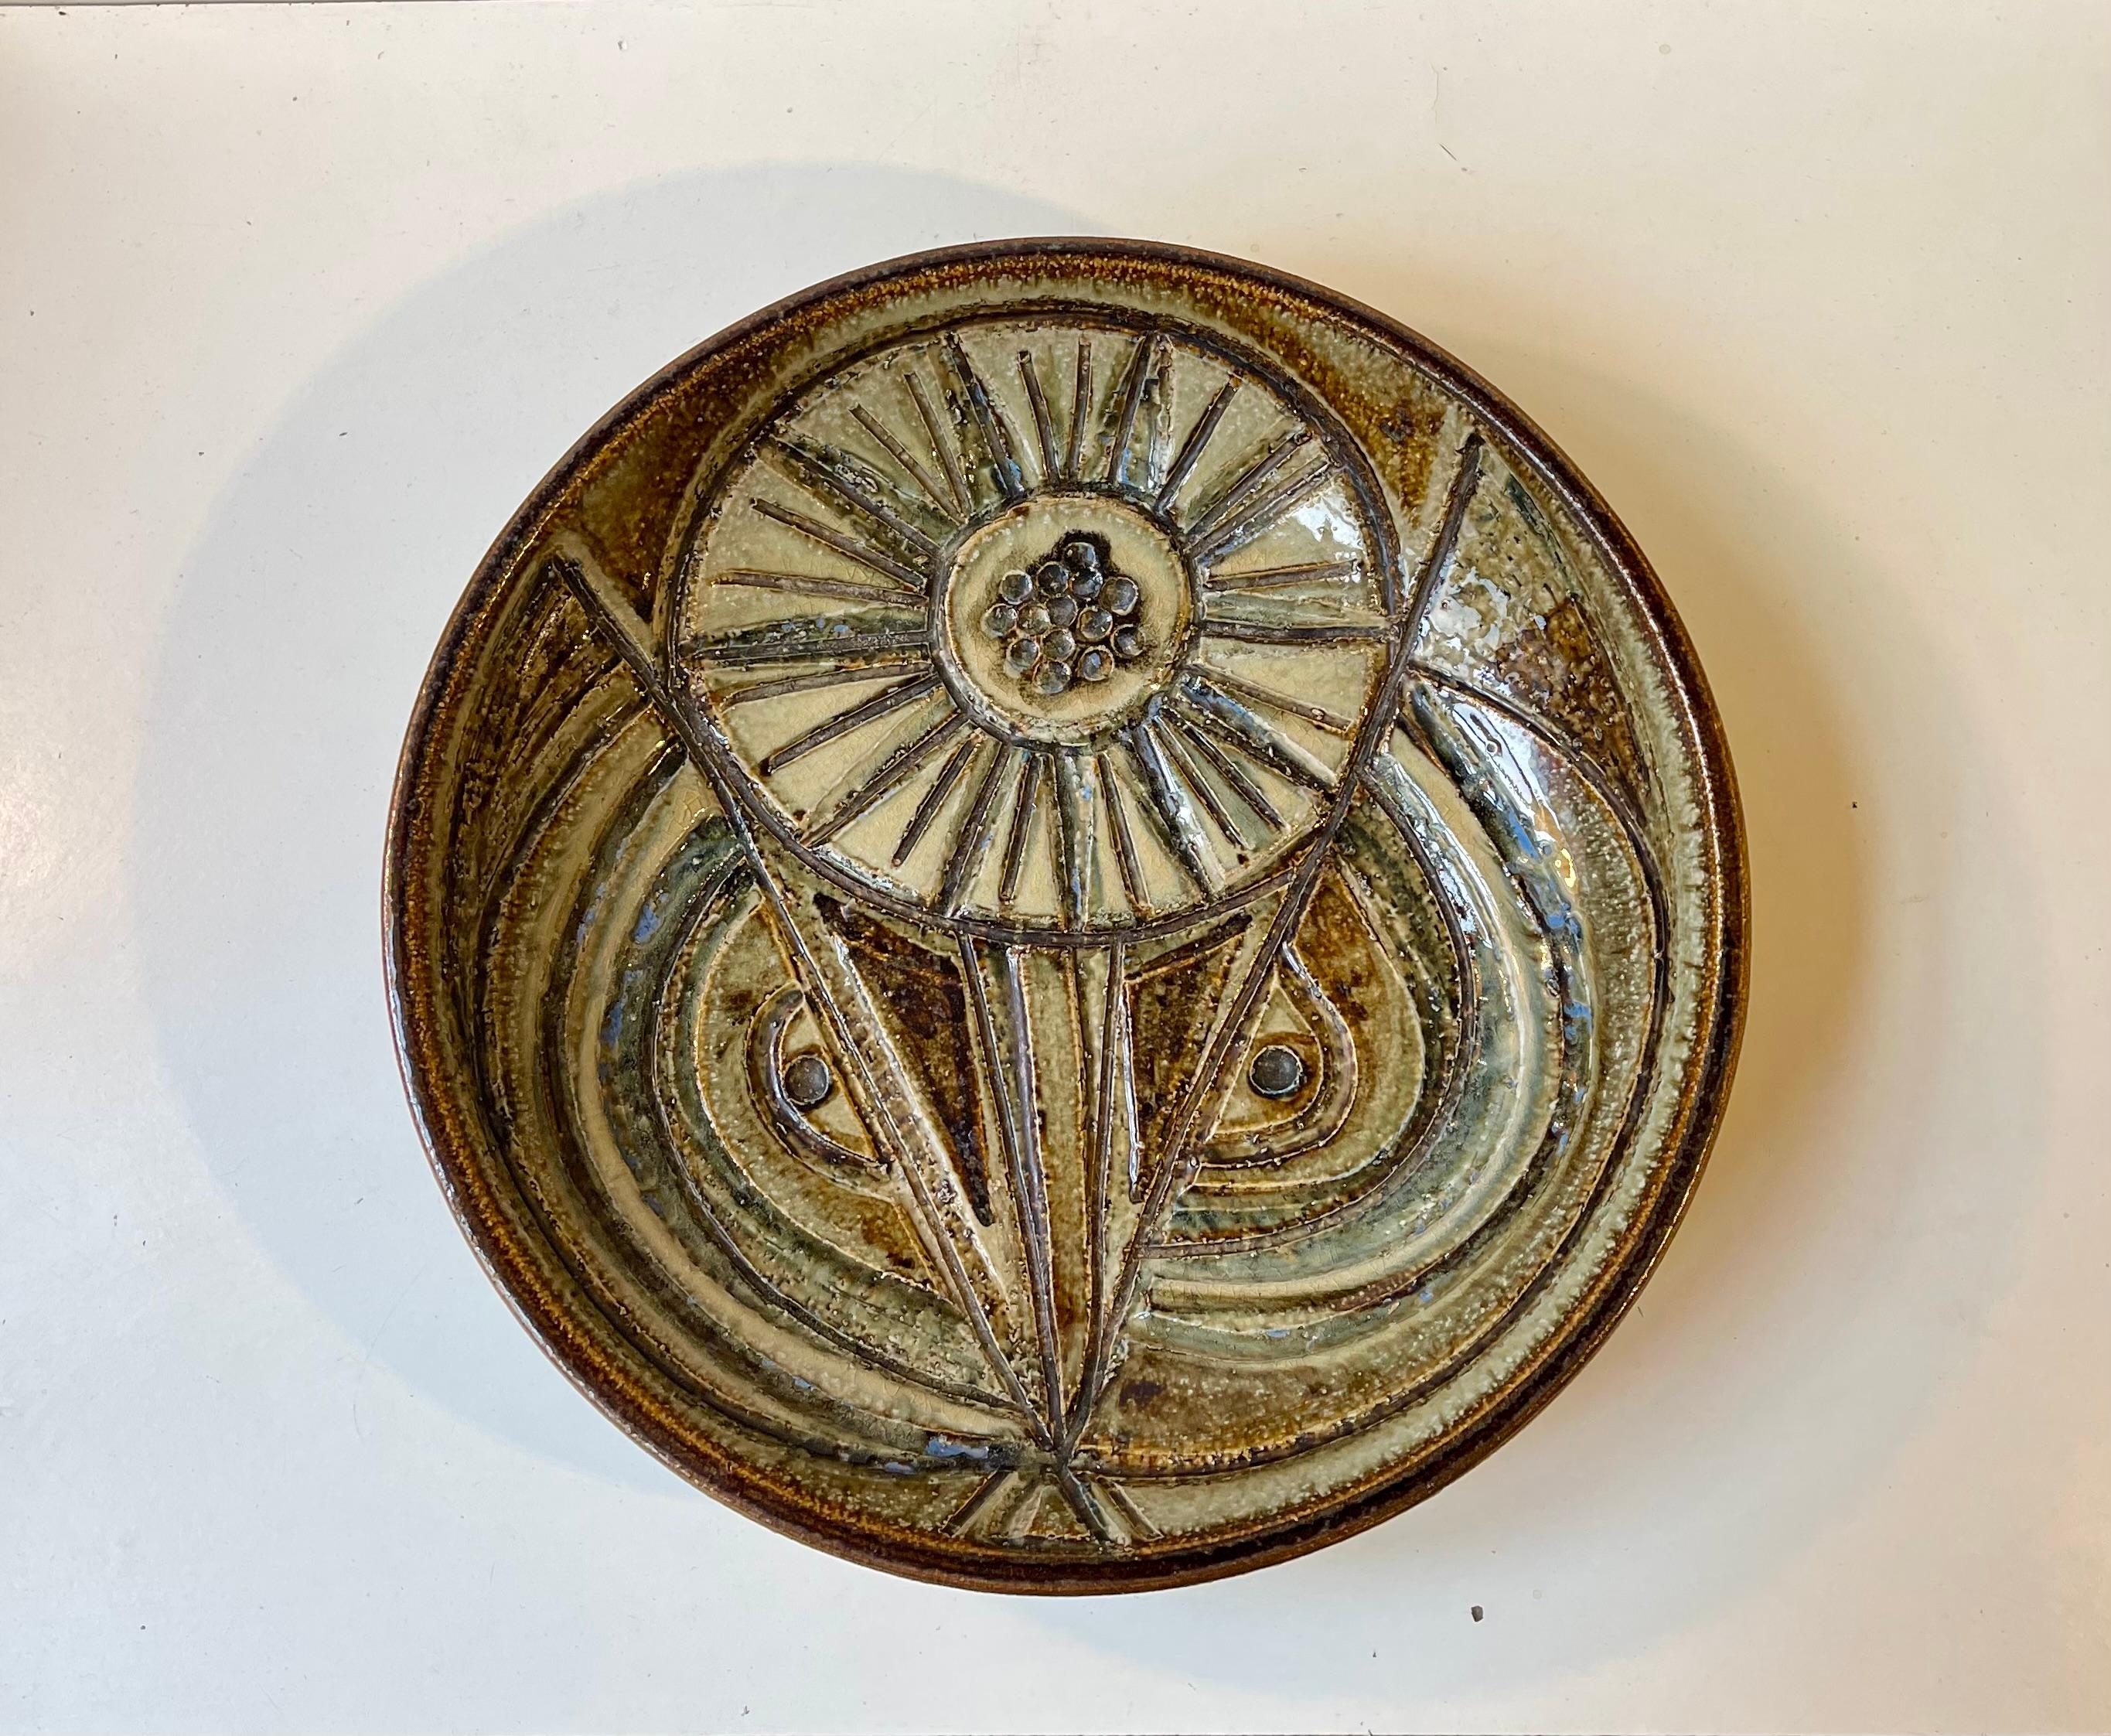 Large handmade centerpiece bowl or dish featuring a variety of earthy glazes set in an abstract sunflower looking motif. It was designed by female ceramist Noomi Backhausen in the late 1960s and manufactured by Soholm. The Bowl is fully marked to